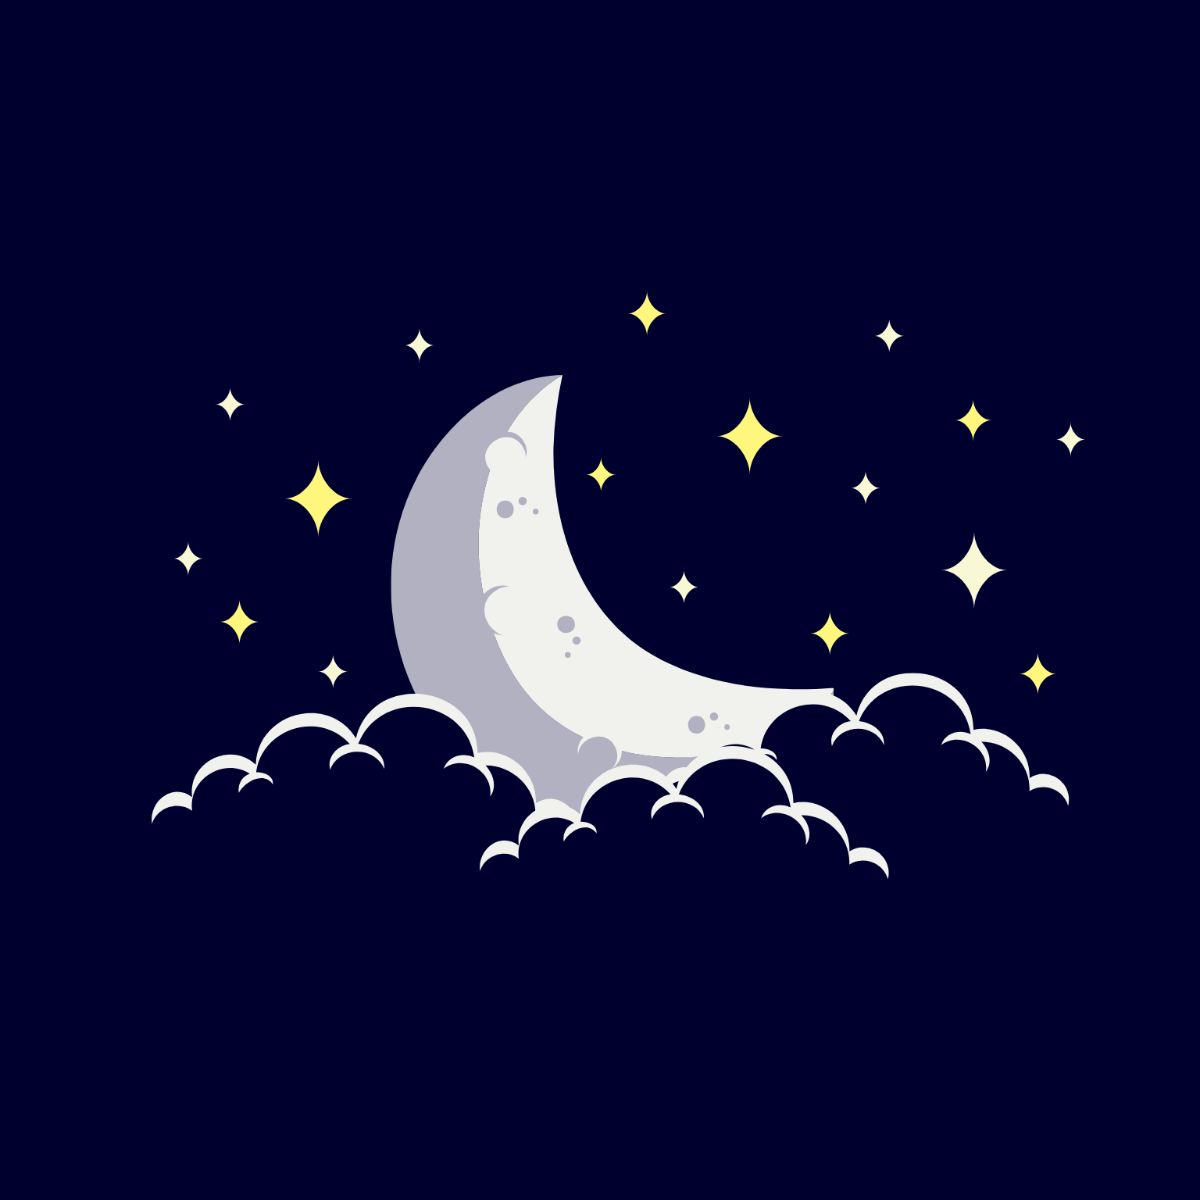 Crescent Moon and Star Vector